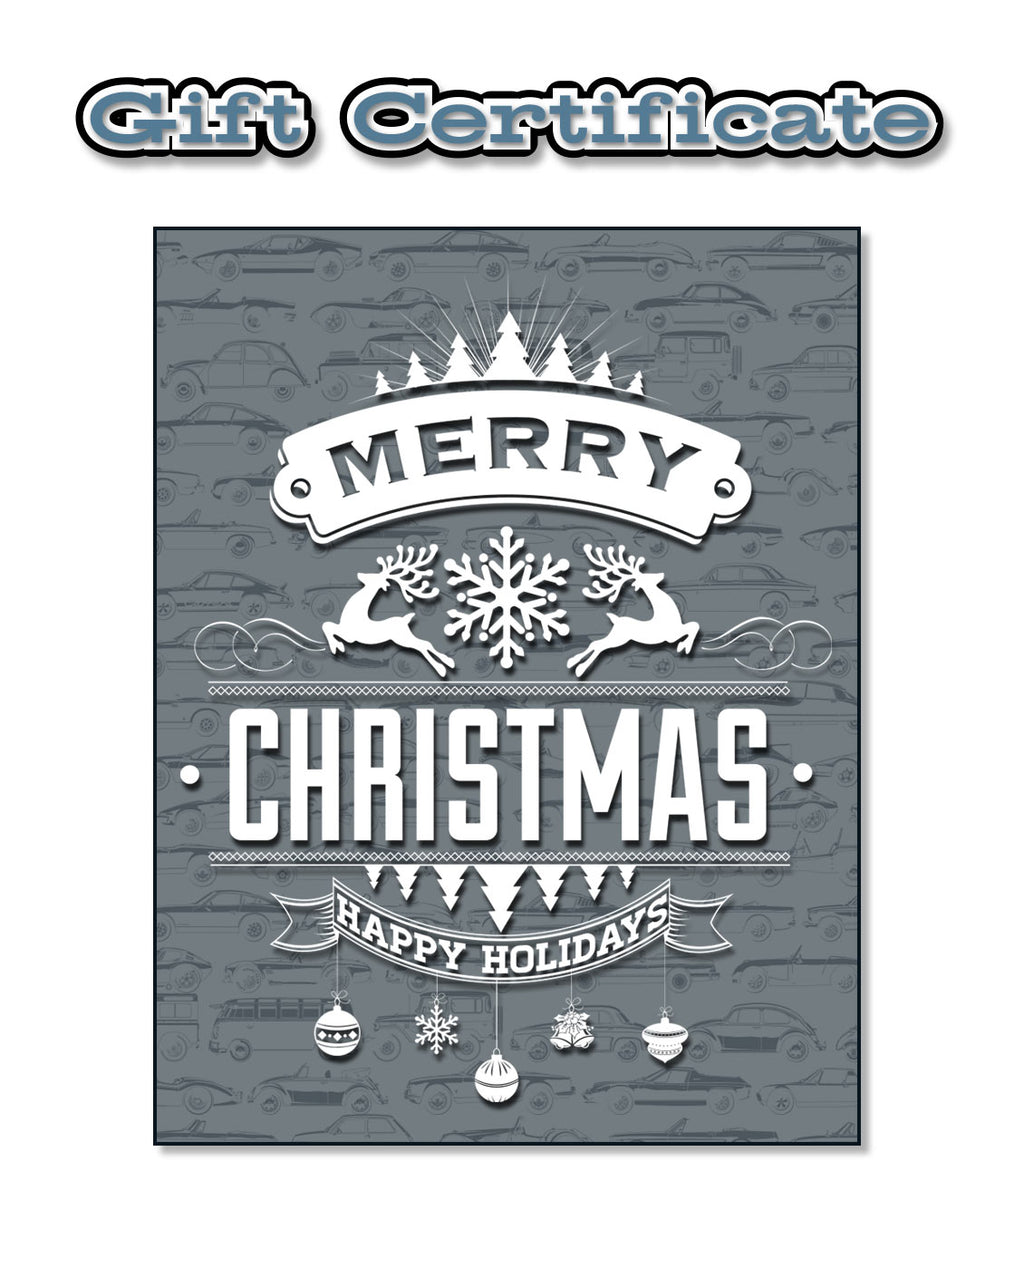 Gift Certificate - Merry Christmas!